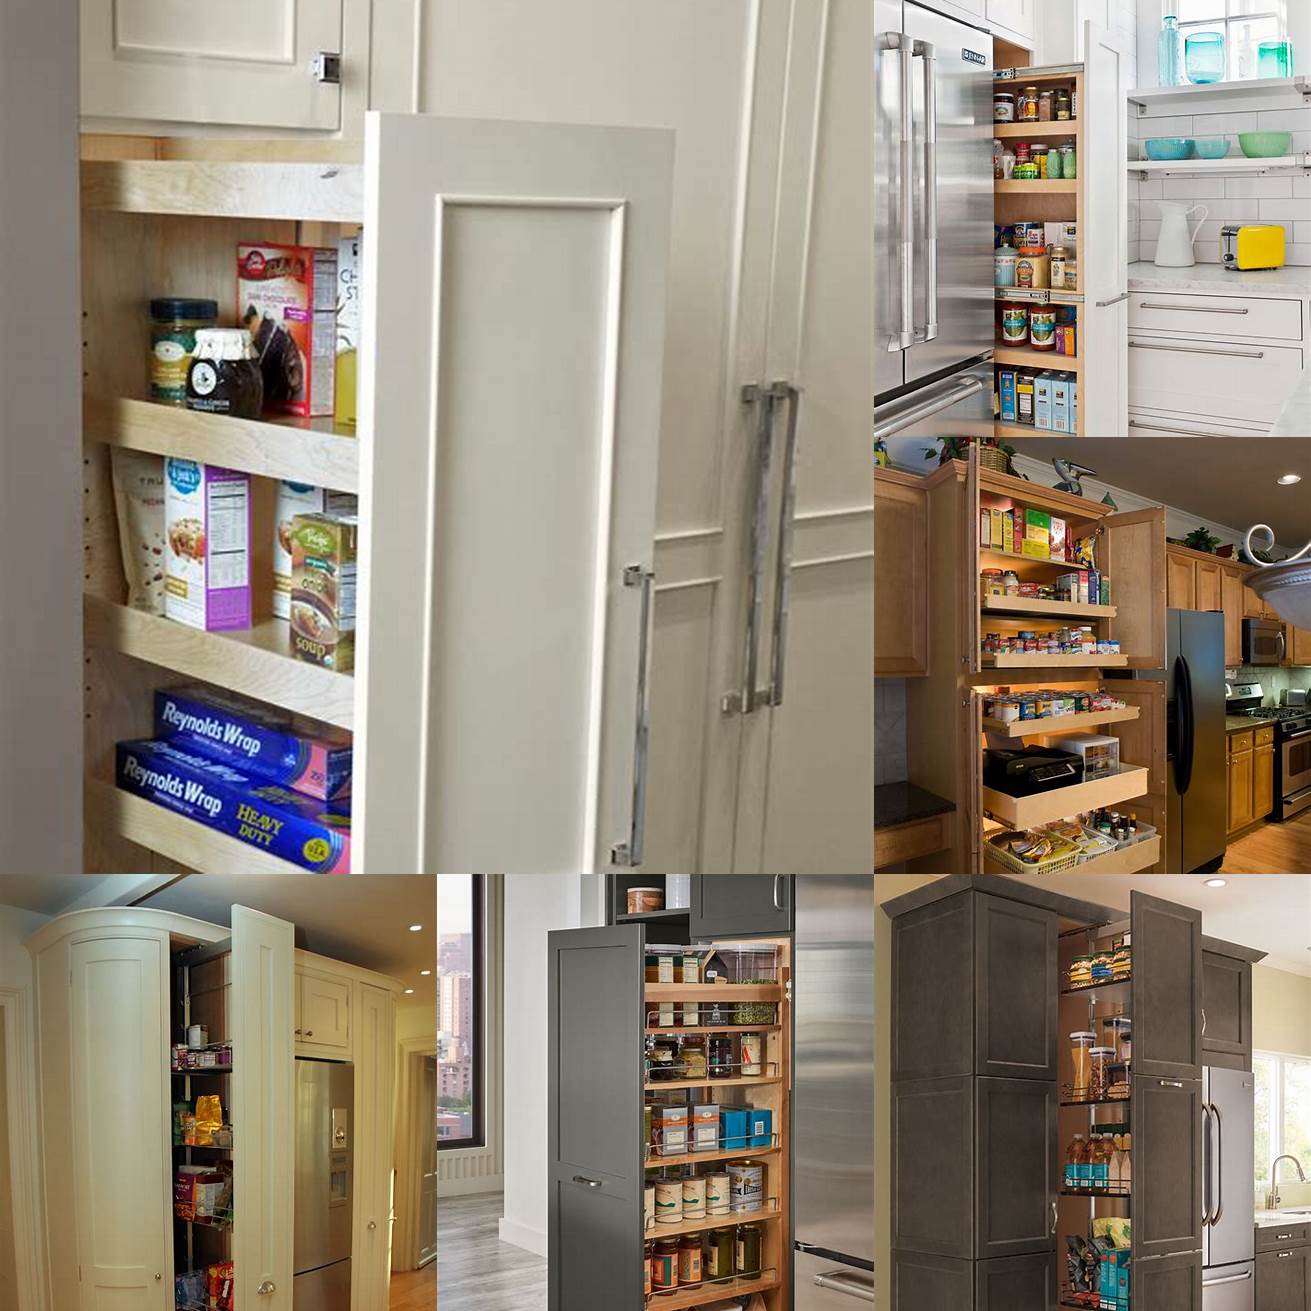 Sears kitchen cabinets with pull-out pantries offer easy access to all your pantry items